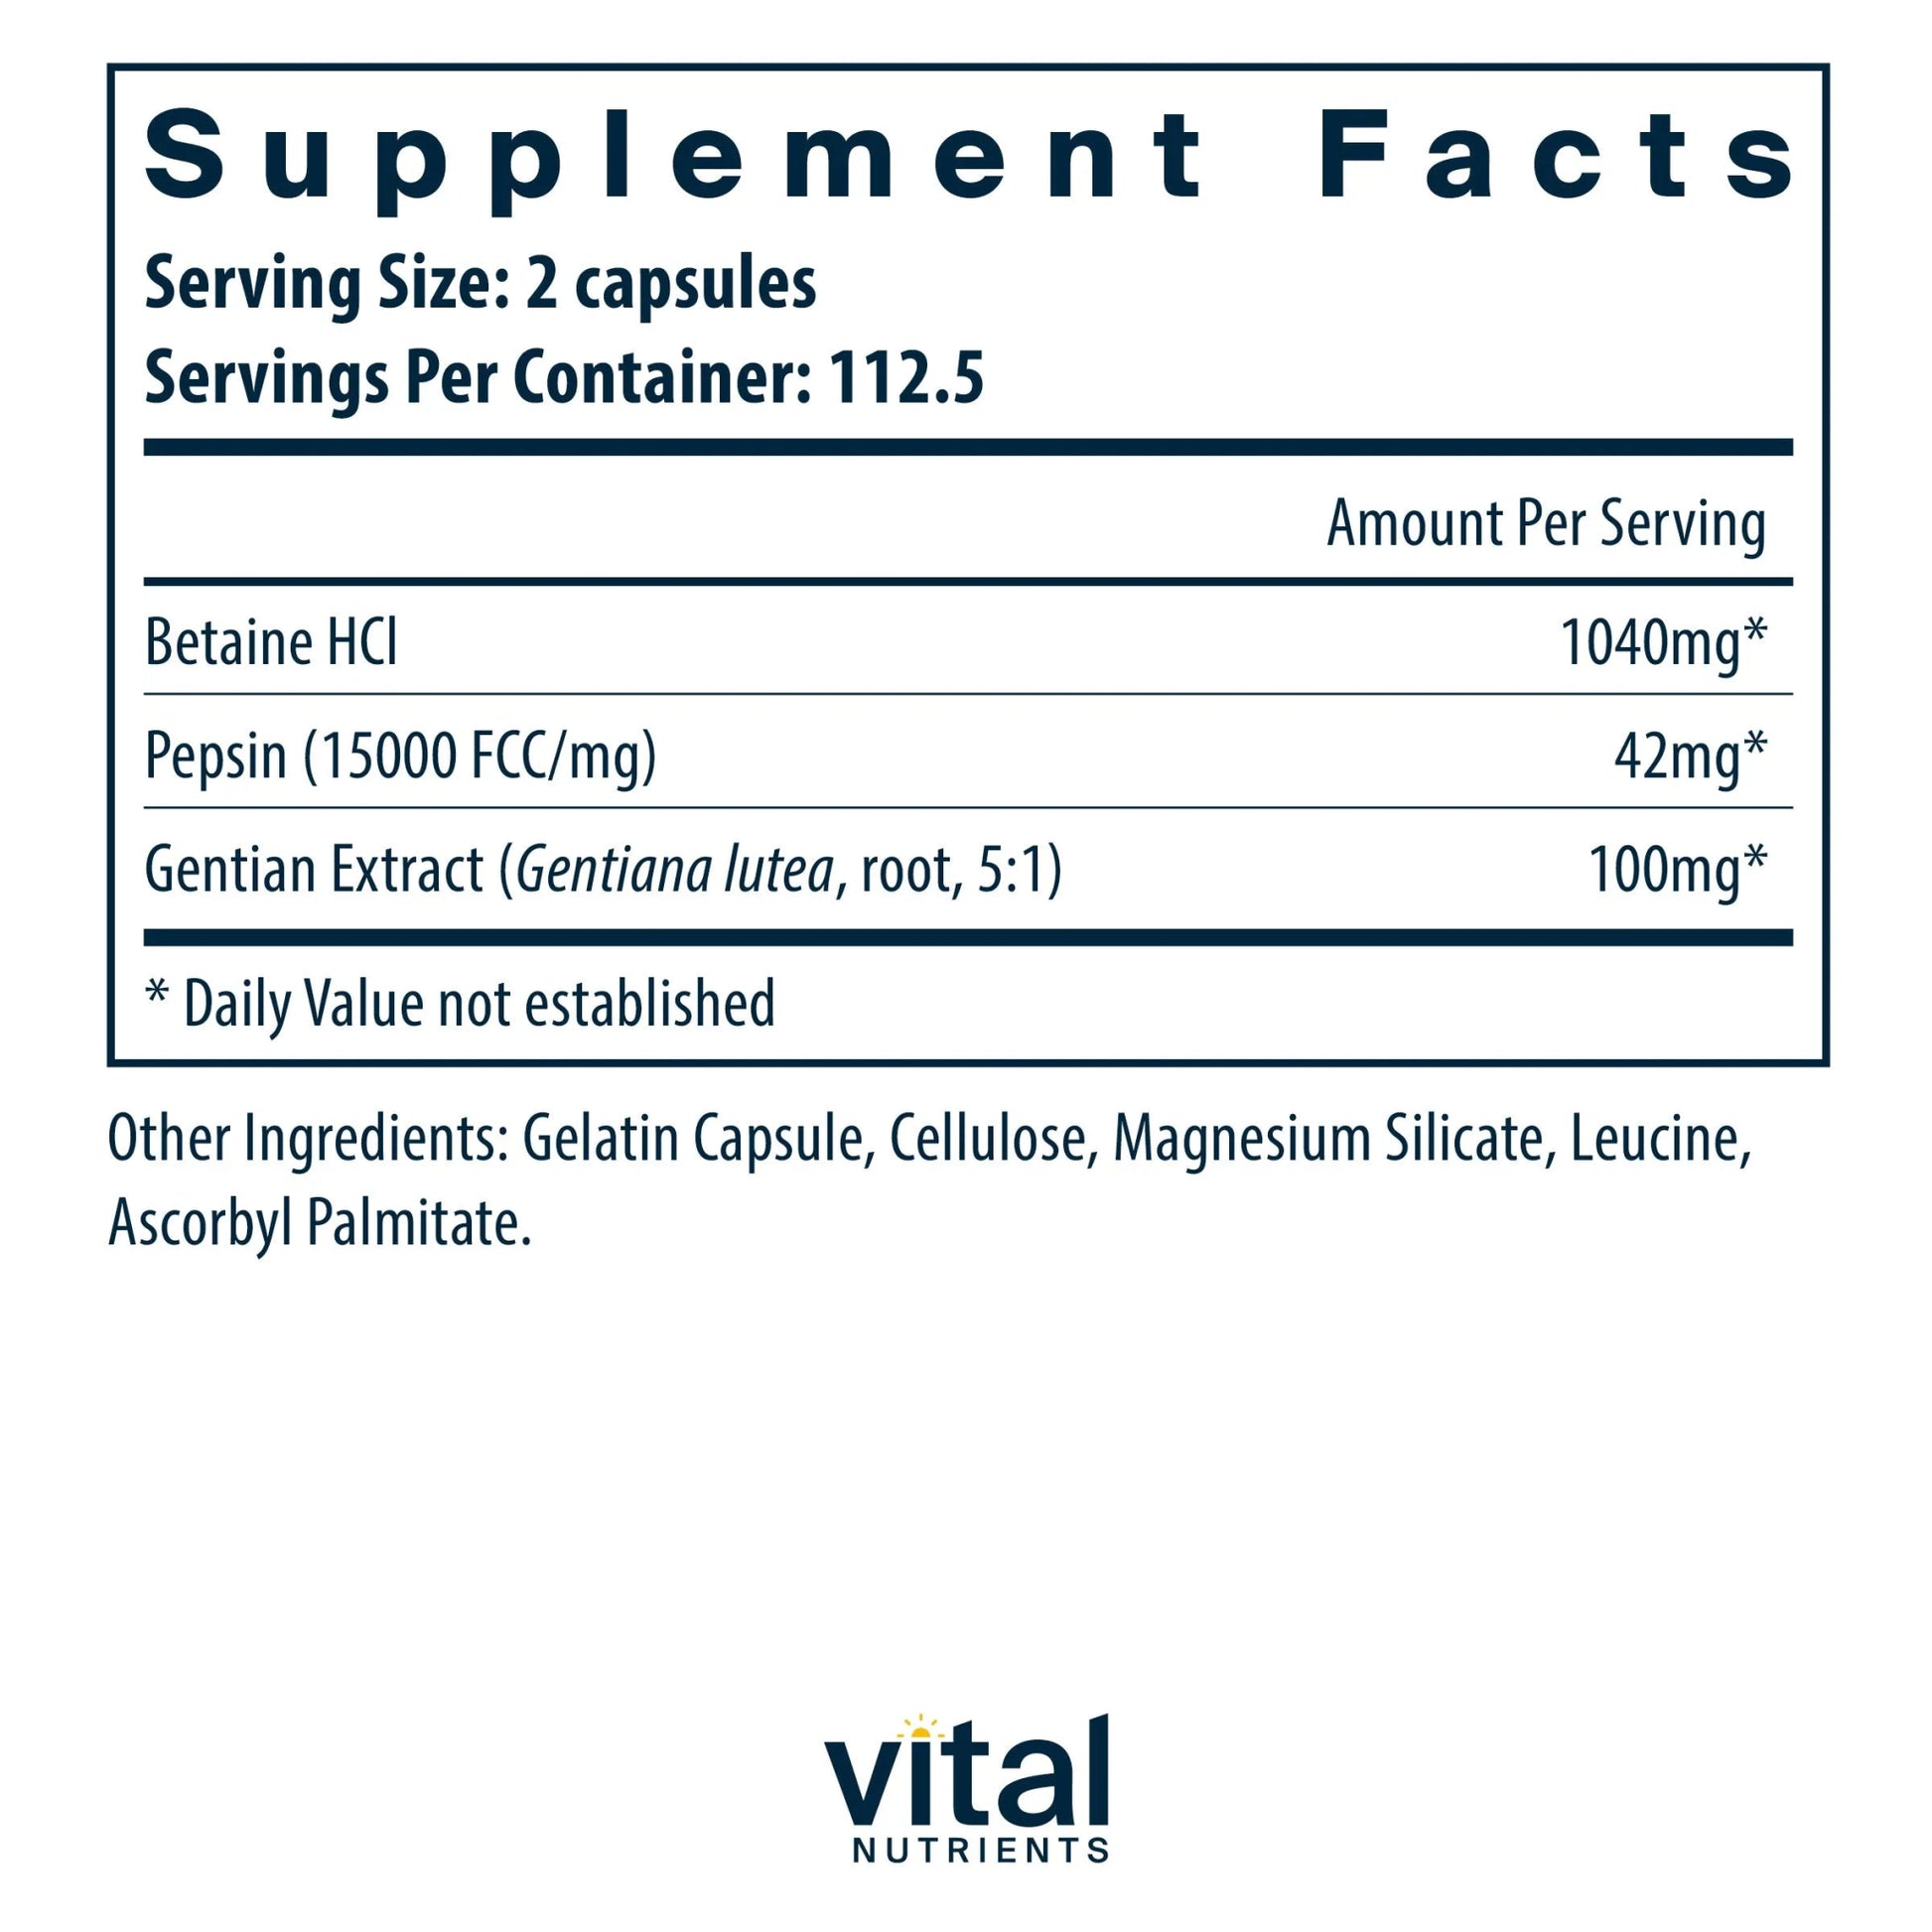 Betaine HCl Pepsin Gentian Root Extract(Vital Nutrition) - HAPIVERI